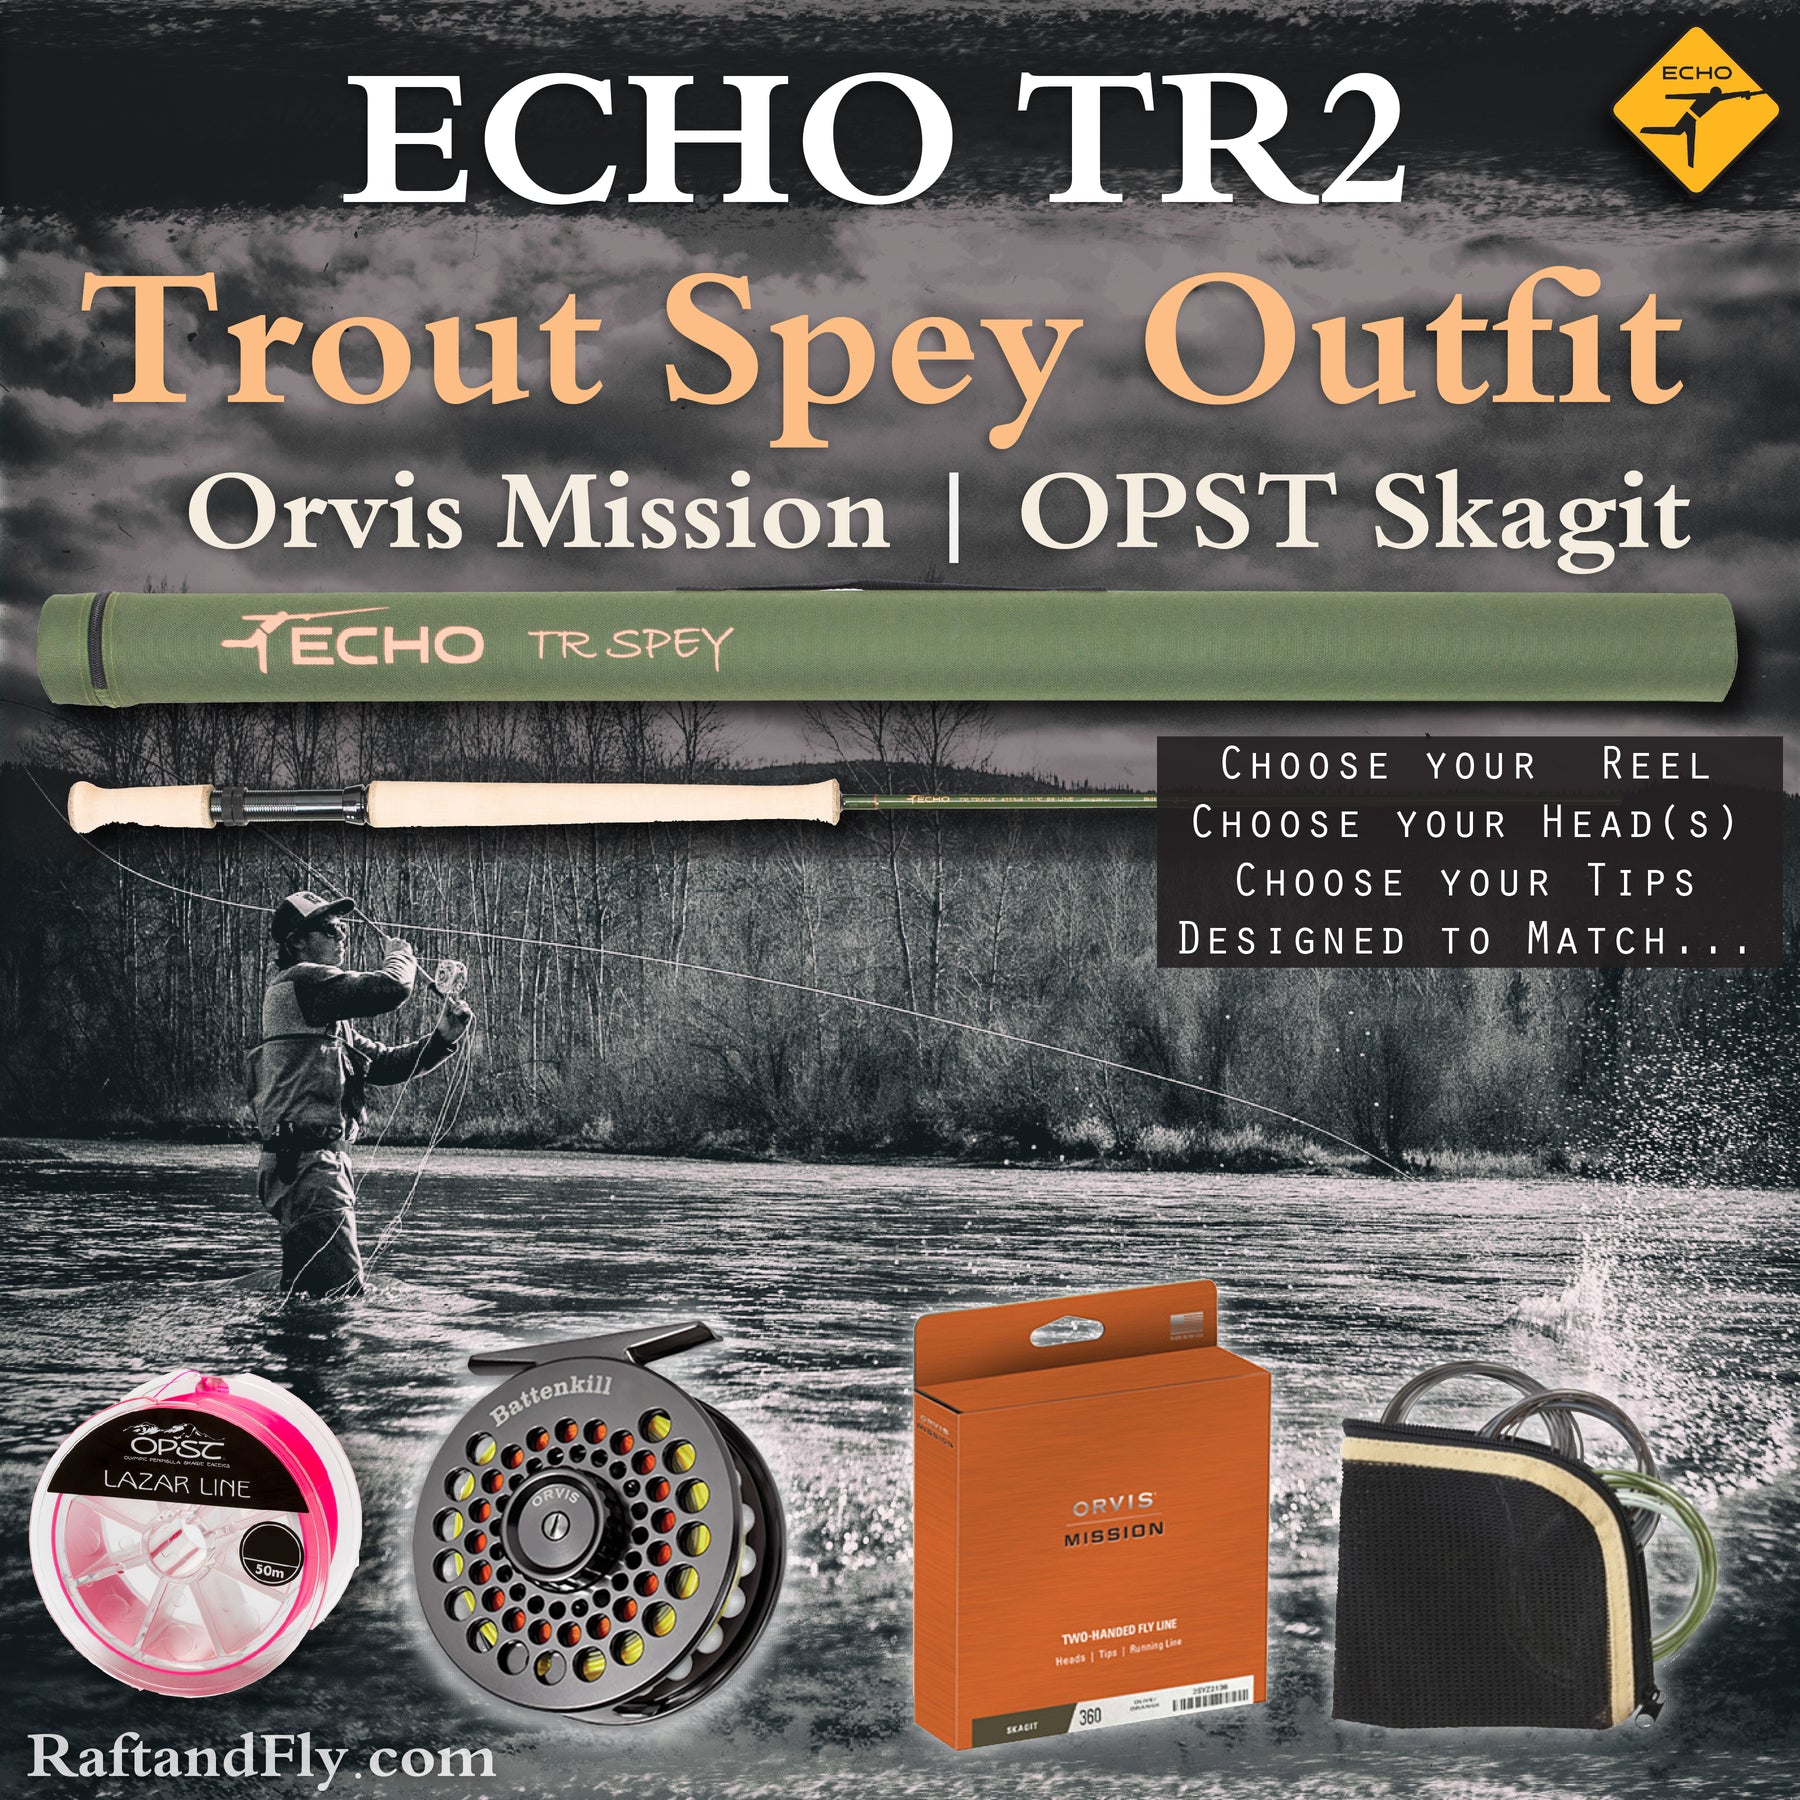 Echo TR2 3wt 11'0 Trout Spey Outfit